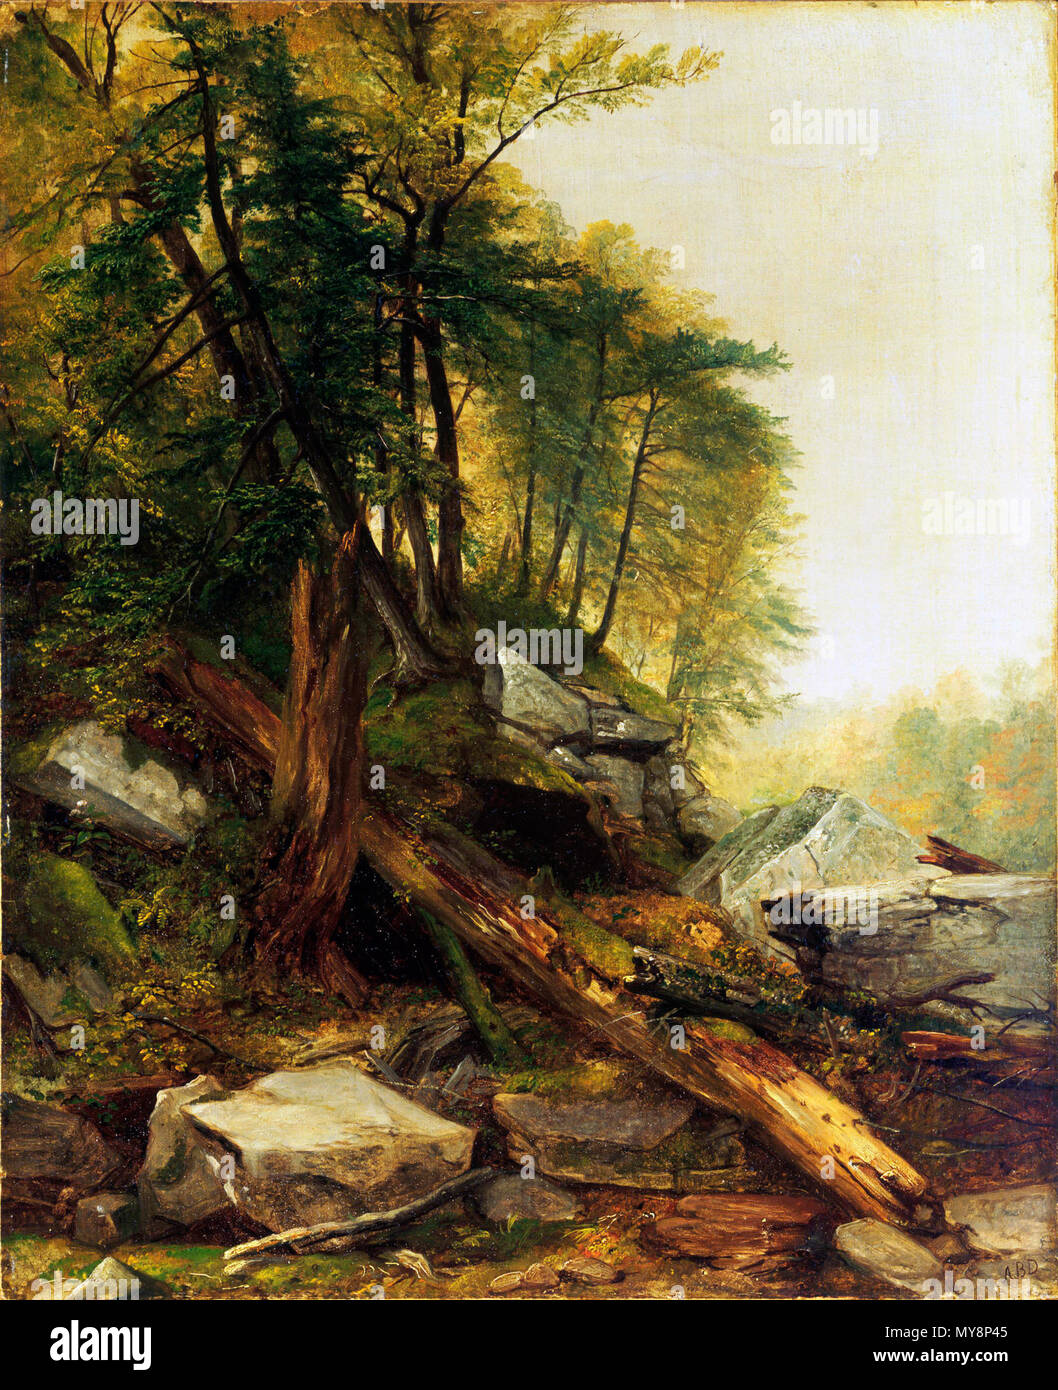 . Anglais : Asher Brown Durand, American, 1796-1886 Kaaterskill Paysage, 1850 huile sur toile 54 x 44 cm. (21 1/4 x 17 5/16 in.) SECTION : 77,2 × 67,2 × 8,5 cm (30 3/8 x 26 7/16 x 3 3/8 in.), l'achat du musée John Maclean Magie, classe de 1892, et de Gertrude Magie Fund y1946-104 . 18506 1850, Durand, Asher Brown, paysage Kaaterskill Banque D'Images